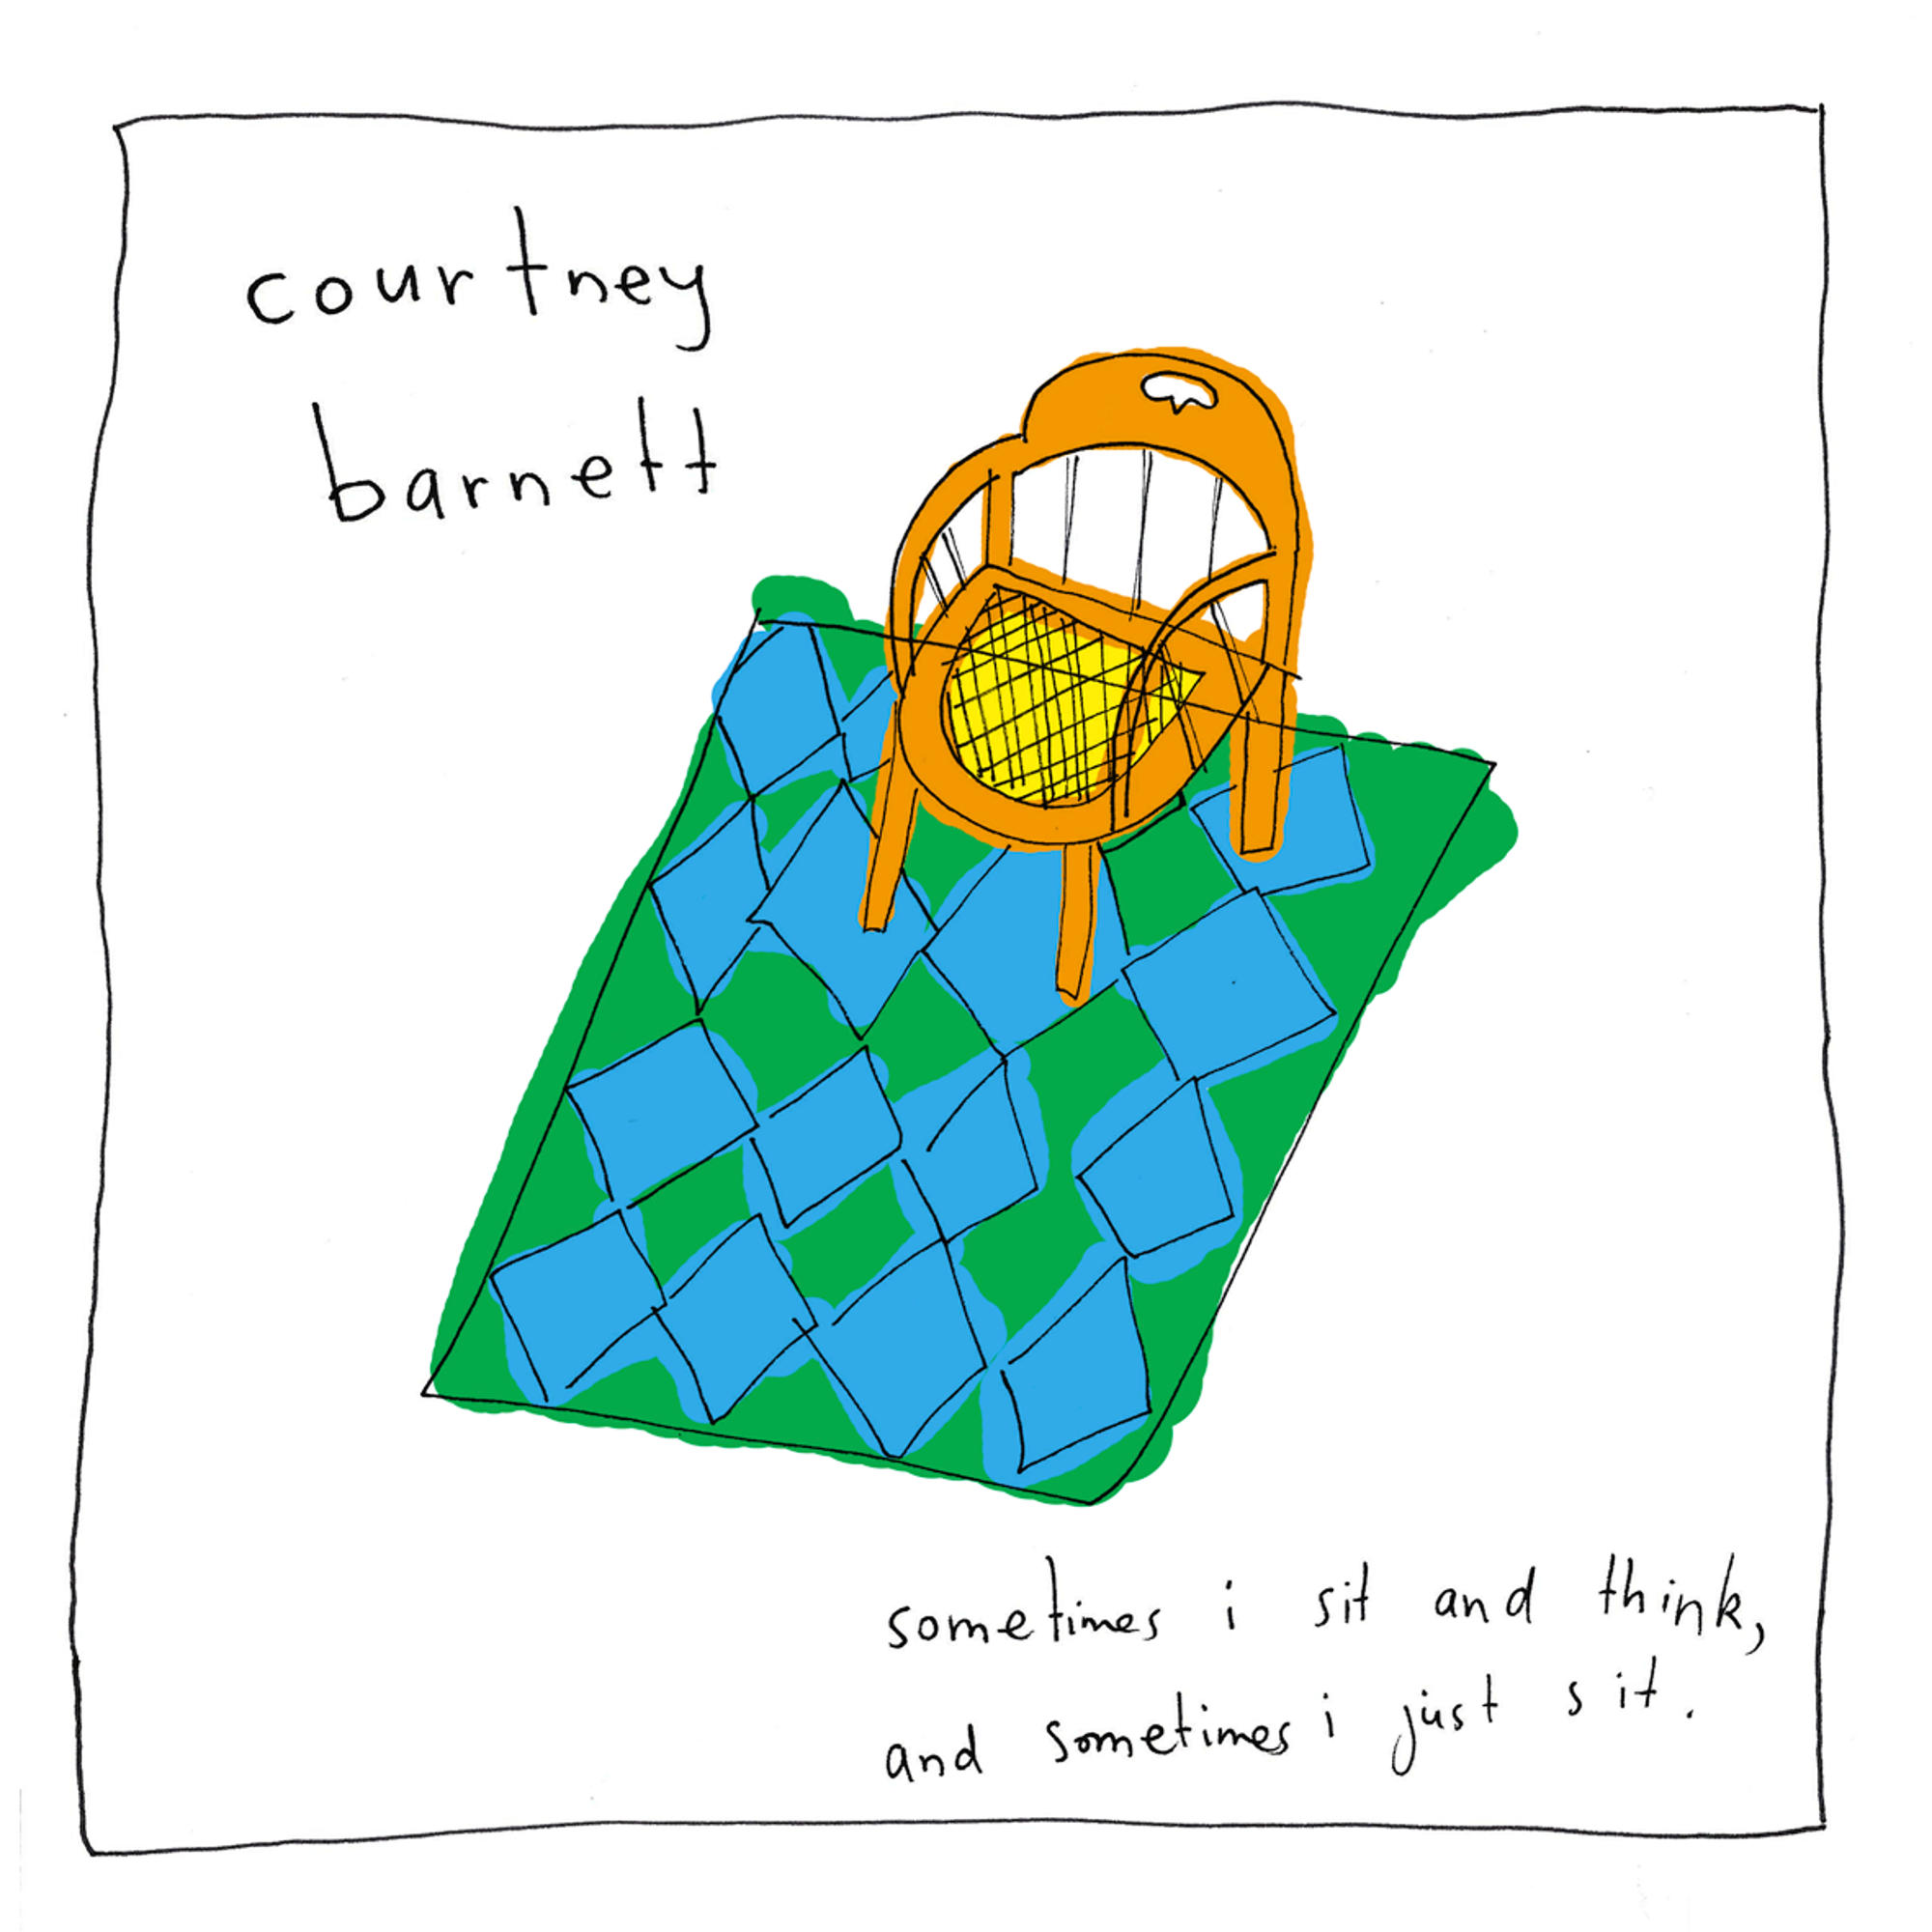 Sometimes...(Lp+Mp3) (Vinyl) And Sit Think, Sometimes Barnett I Courtney And - -